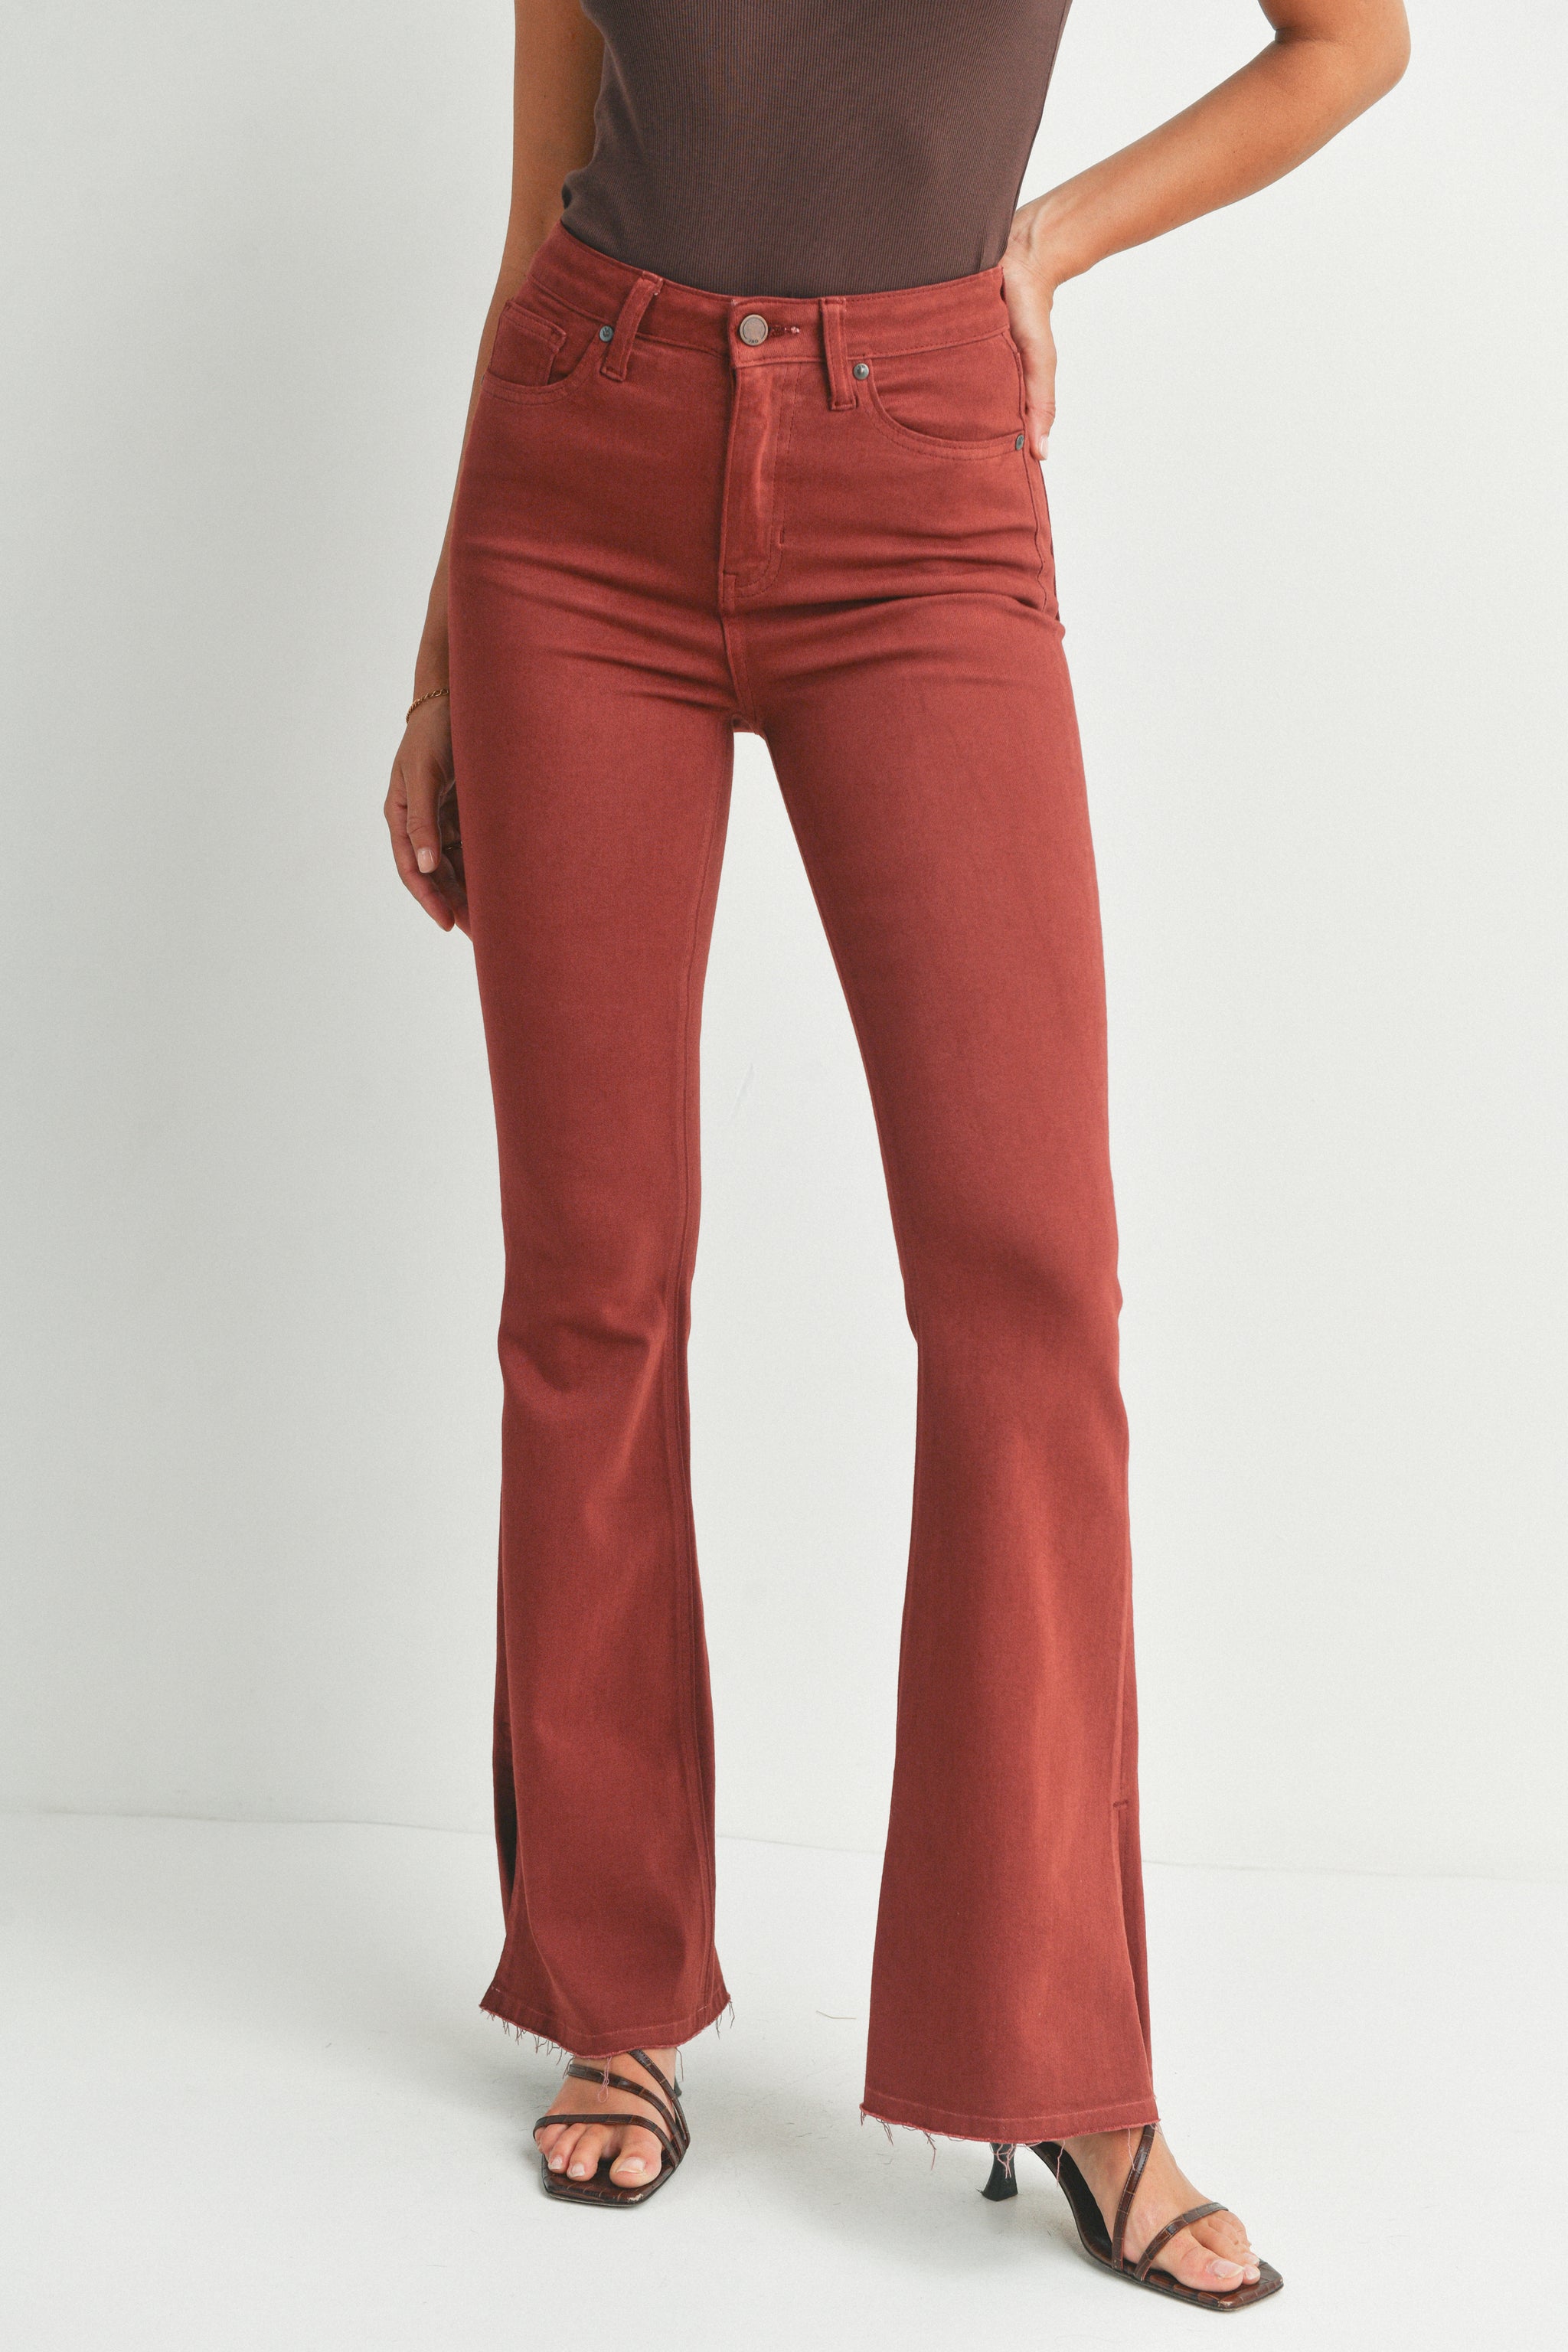 Just Black Denim, Red Flare Jeans for Women